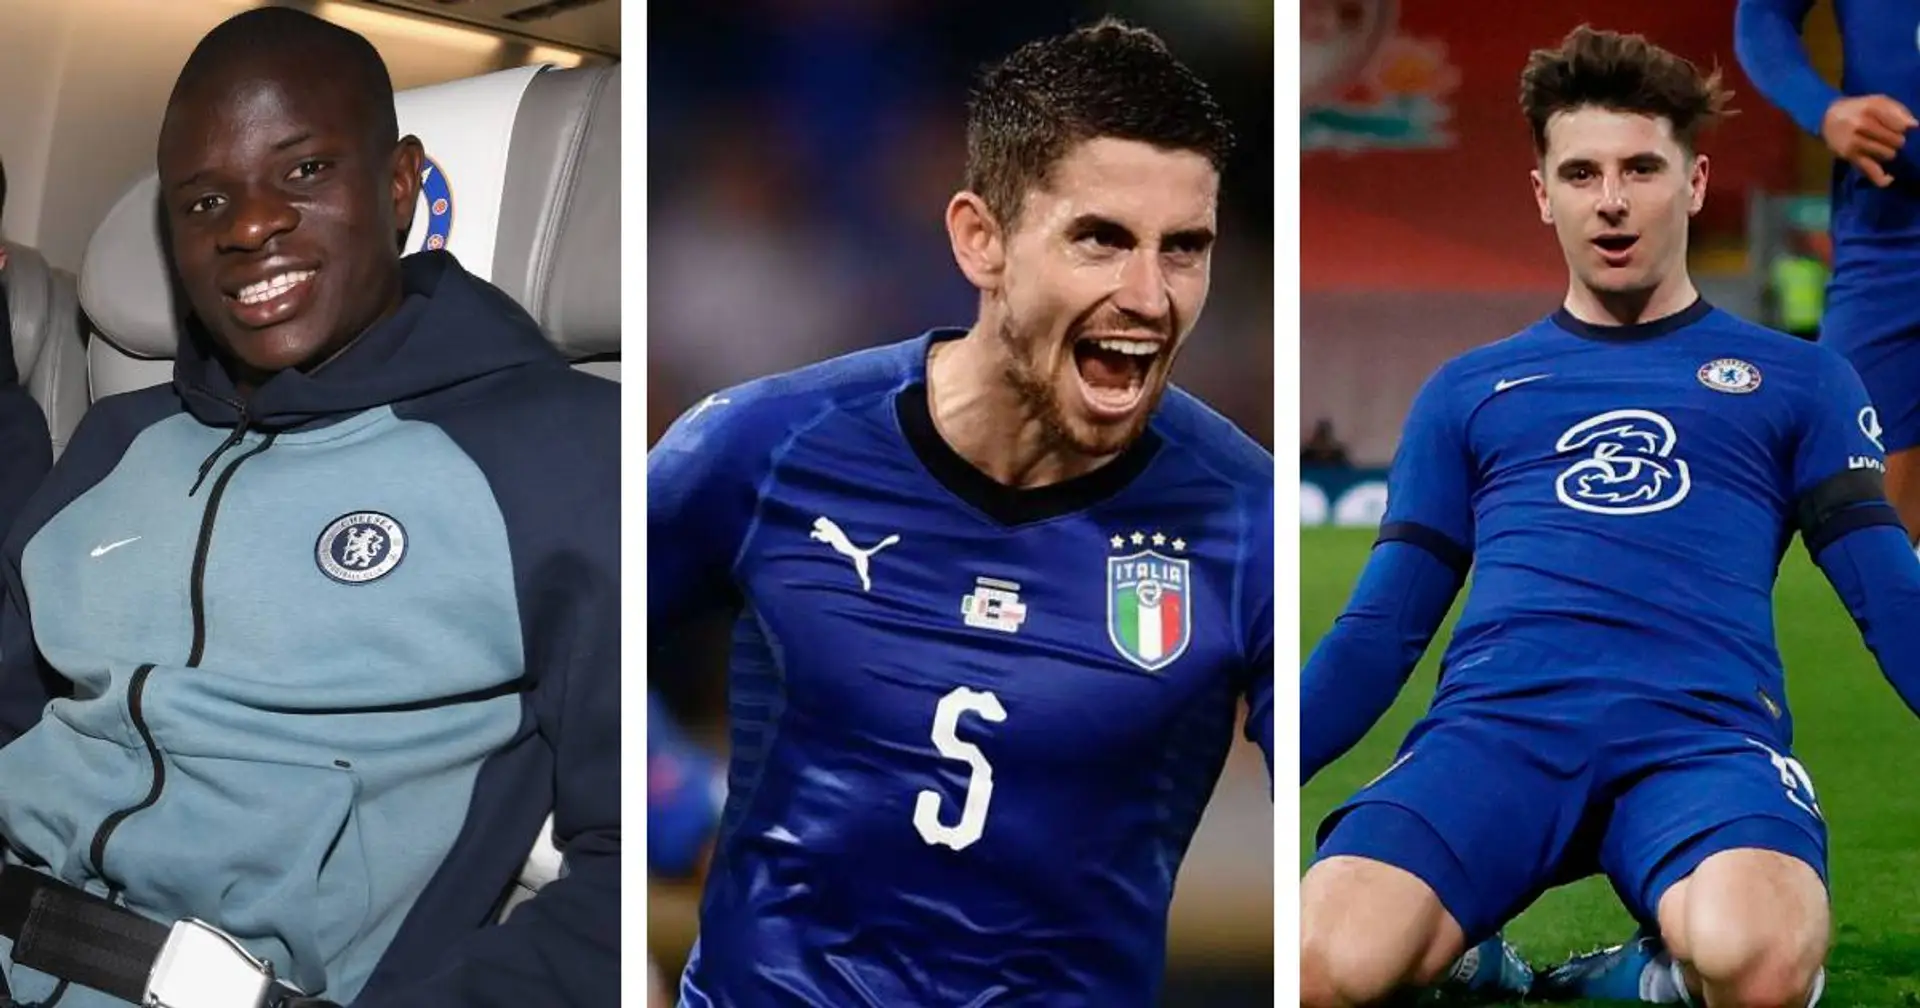 5 Blues nominated for Ballon d'Or - which one do you think deserves award the most?